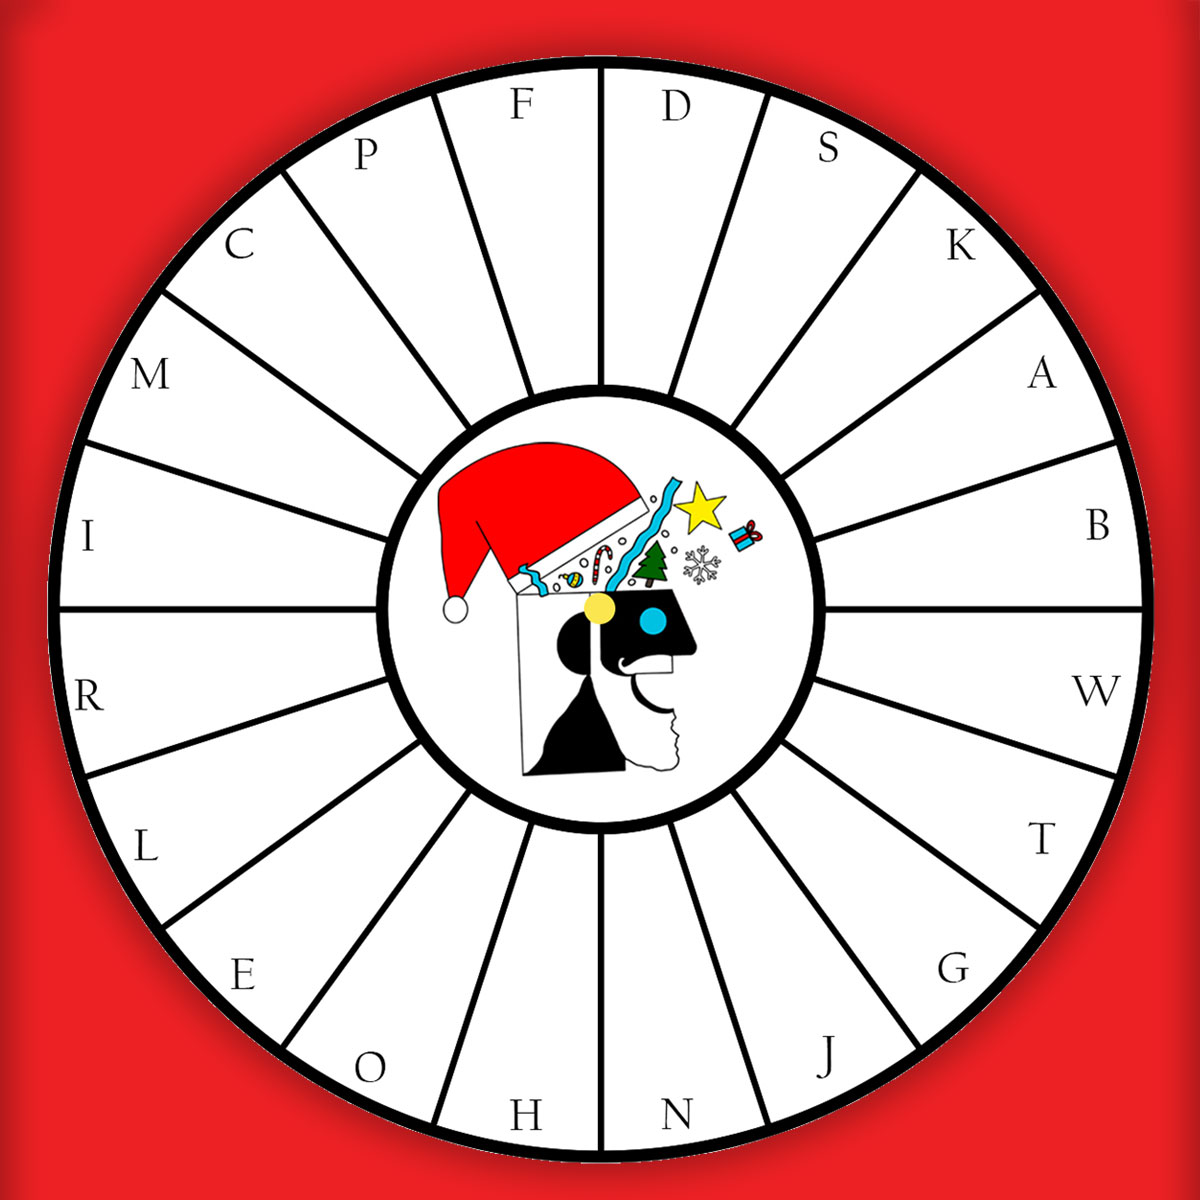 This image shows the free Christmas Scattergories spinner included in the free game set.